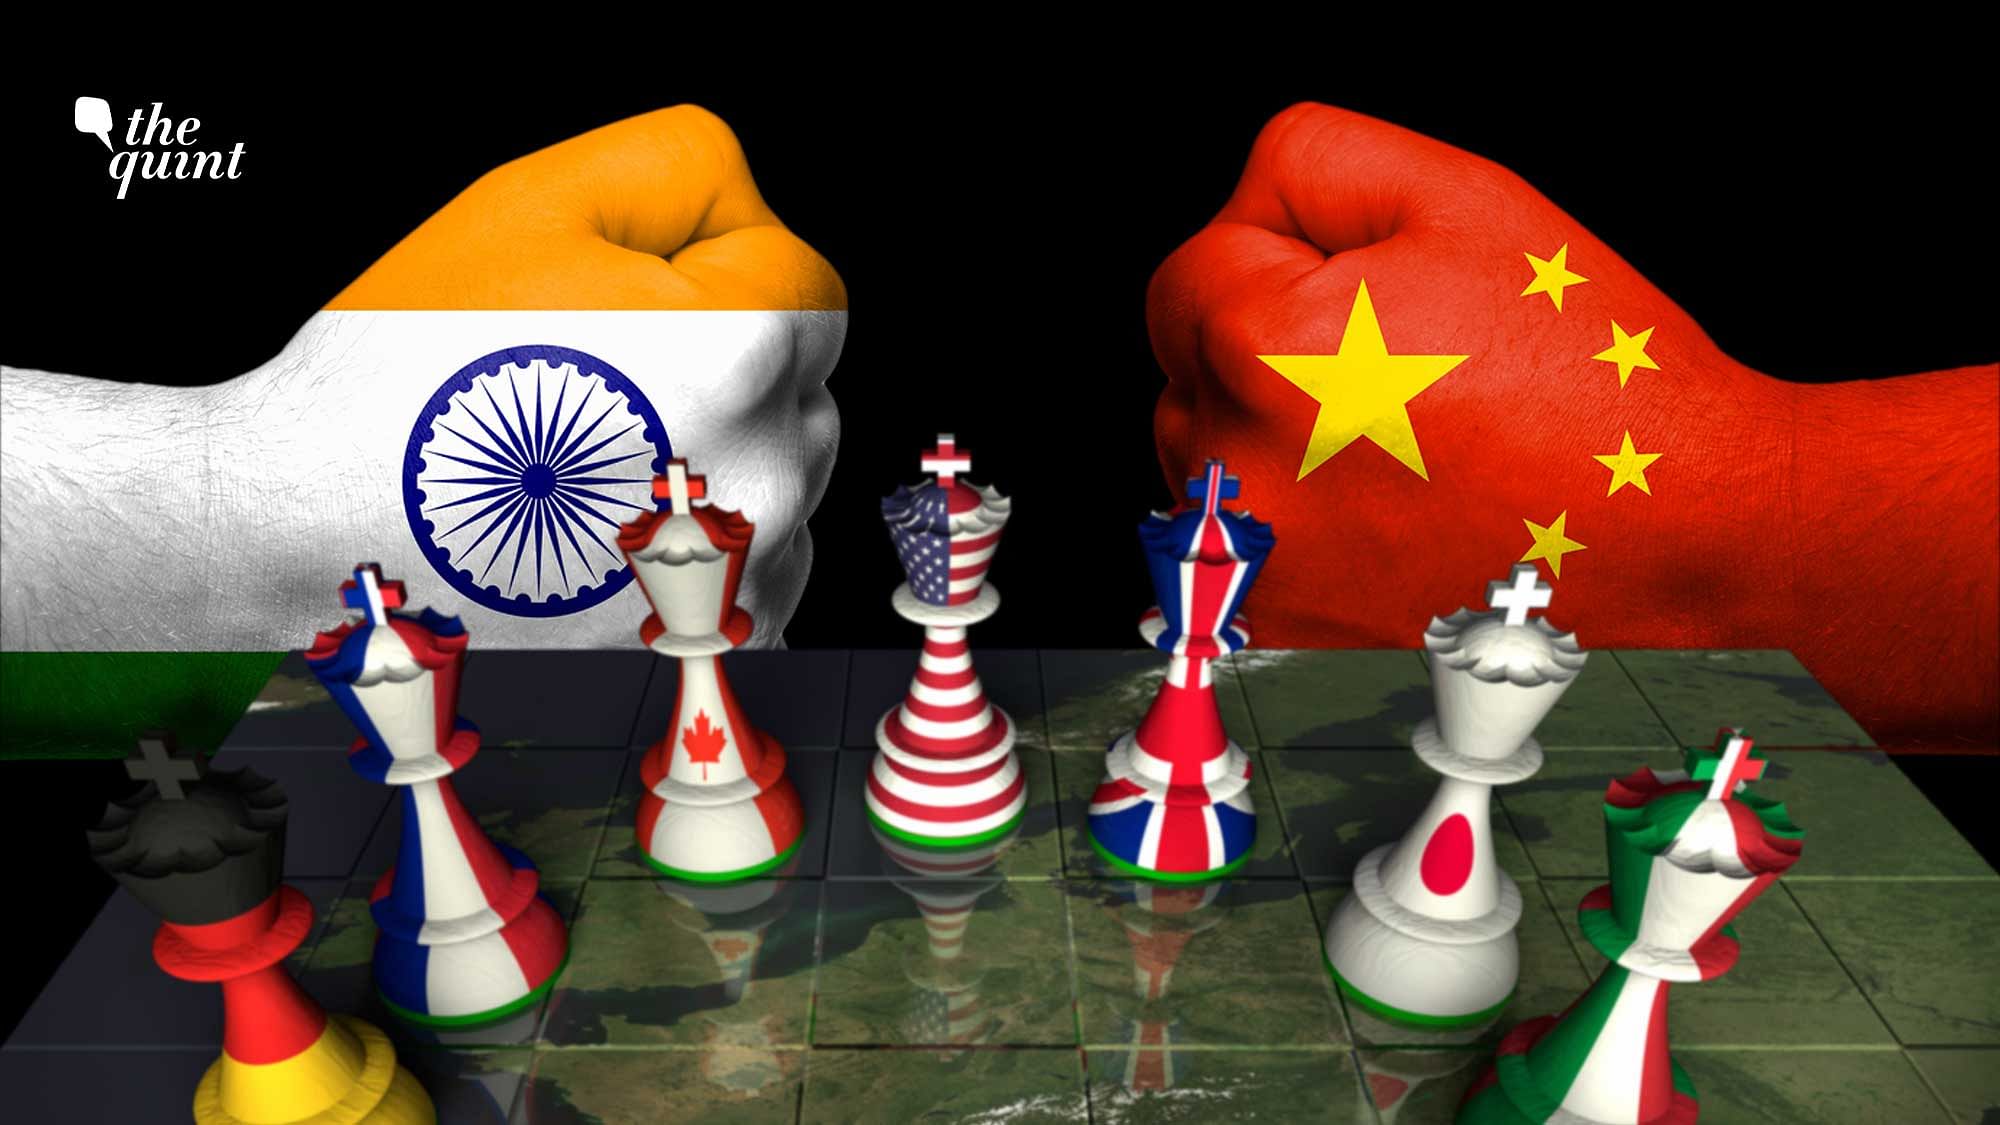 Image of G7 member countries (on chess board) and India &amp; China’s flags (at the back) used for representational purposes.